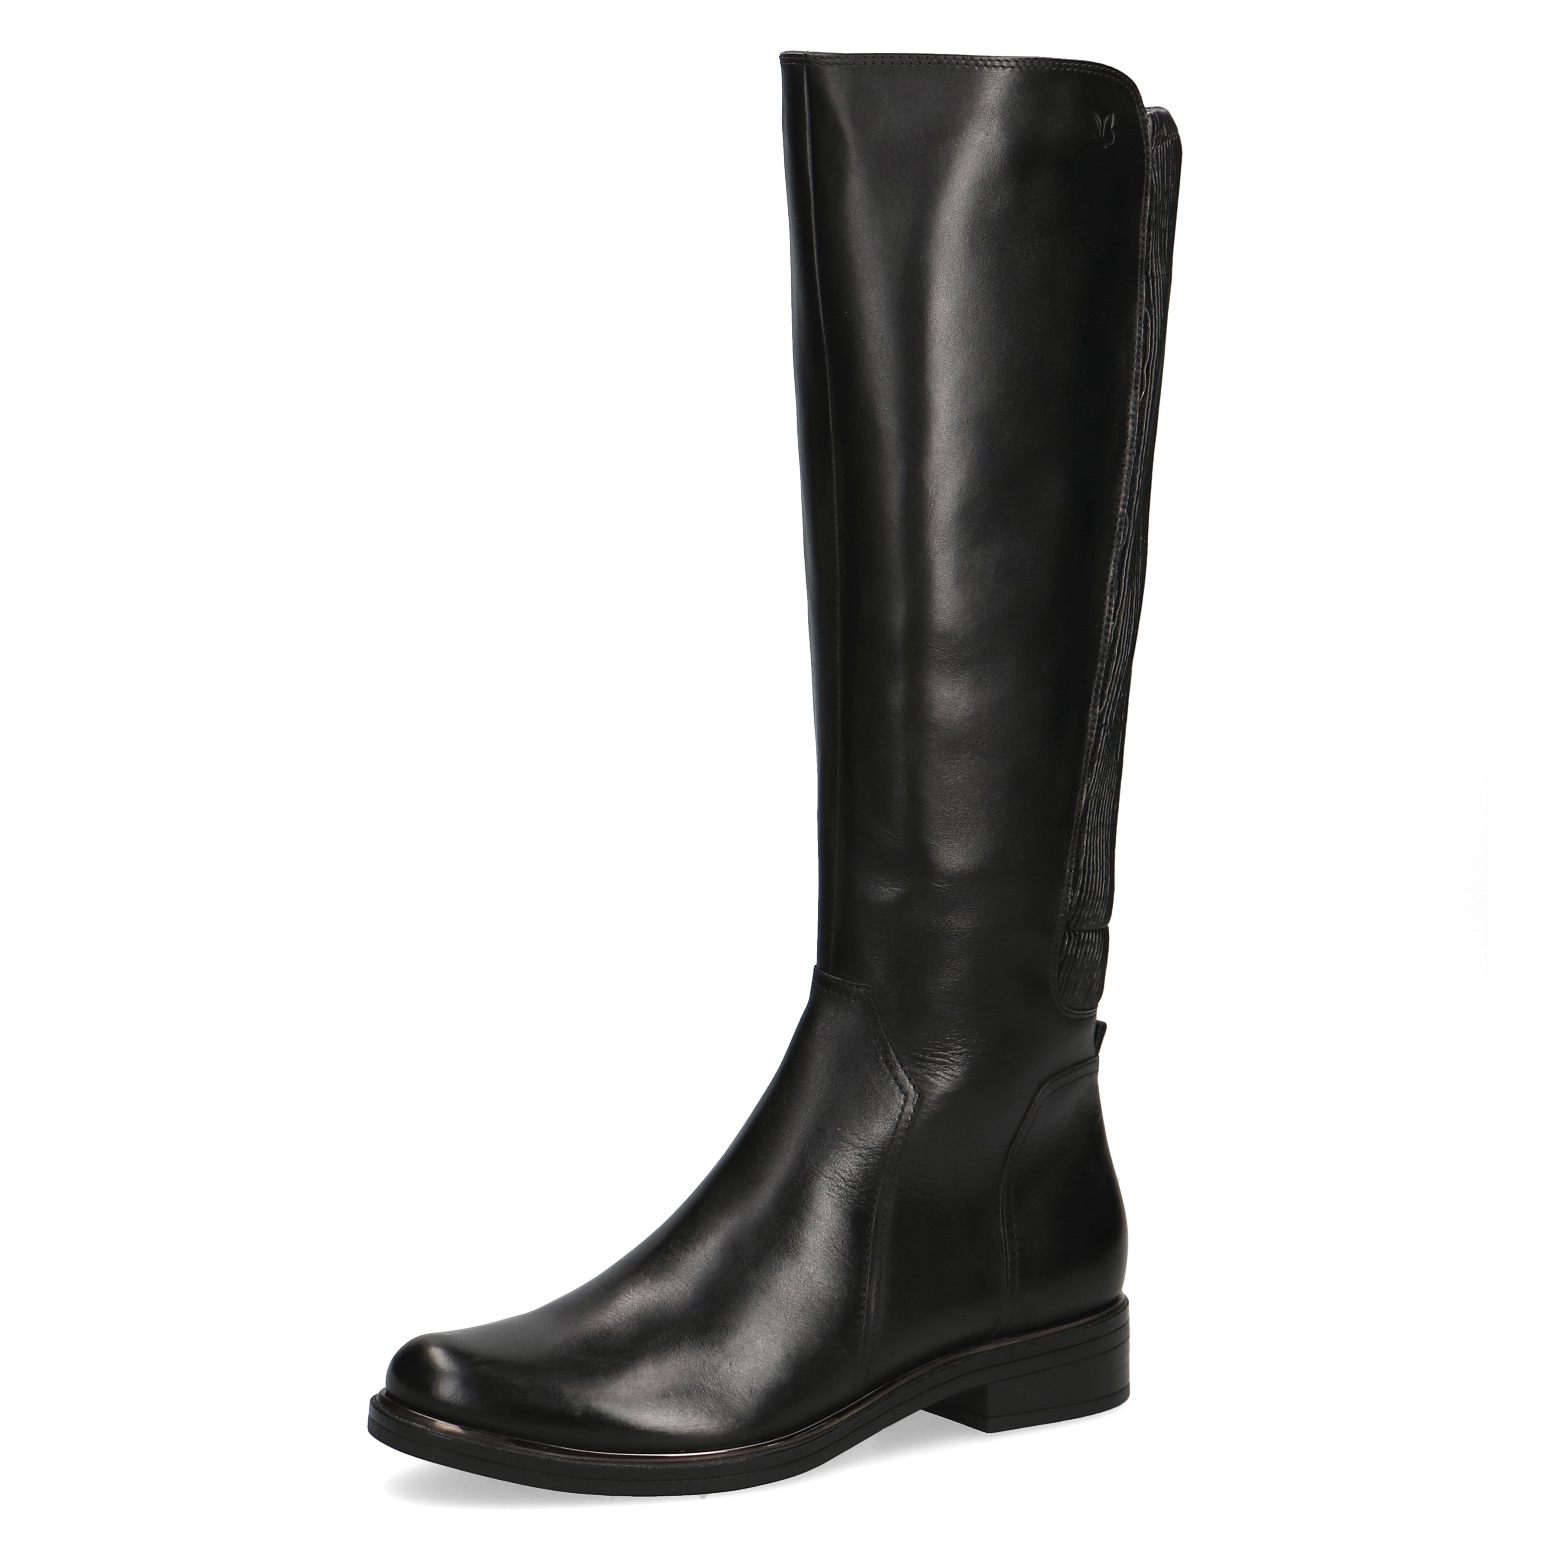 Caprice Stiefel - Black Leather/Synthetic